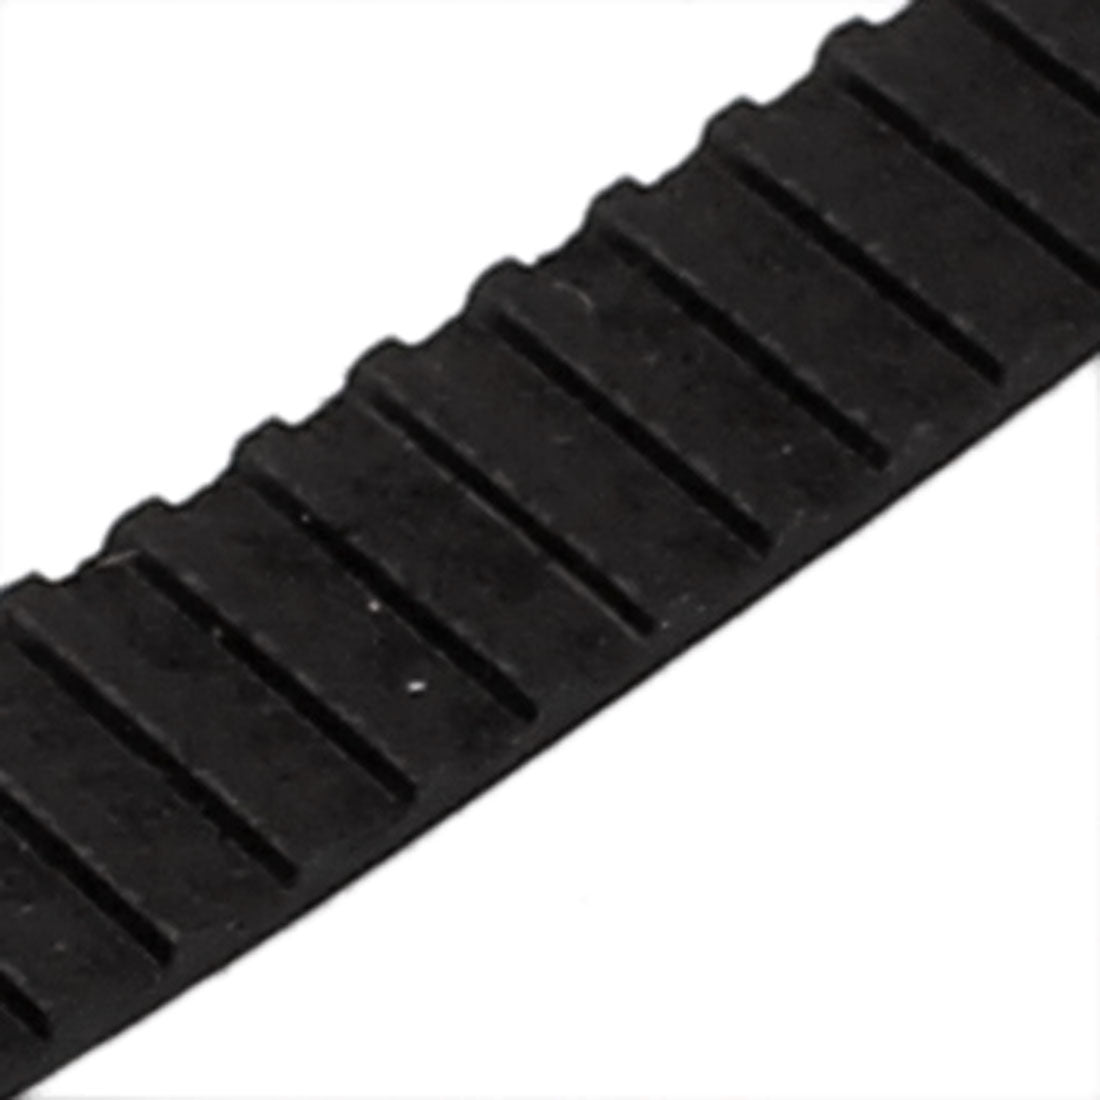 uxcell Uxcell B80MXL Rubber Timing Belt Synchronous Closed Loop 80 Teeth 6mm Width 162.56mm Perimeter